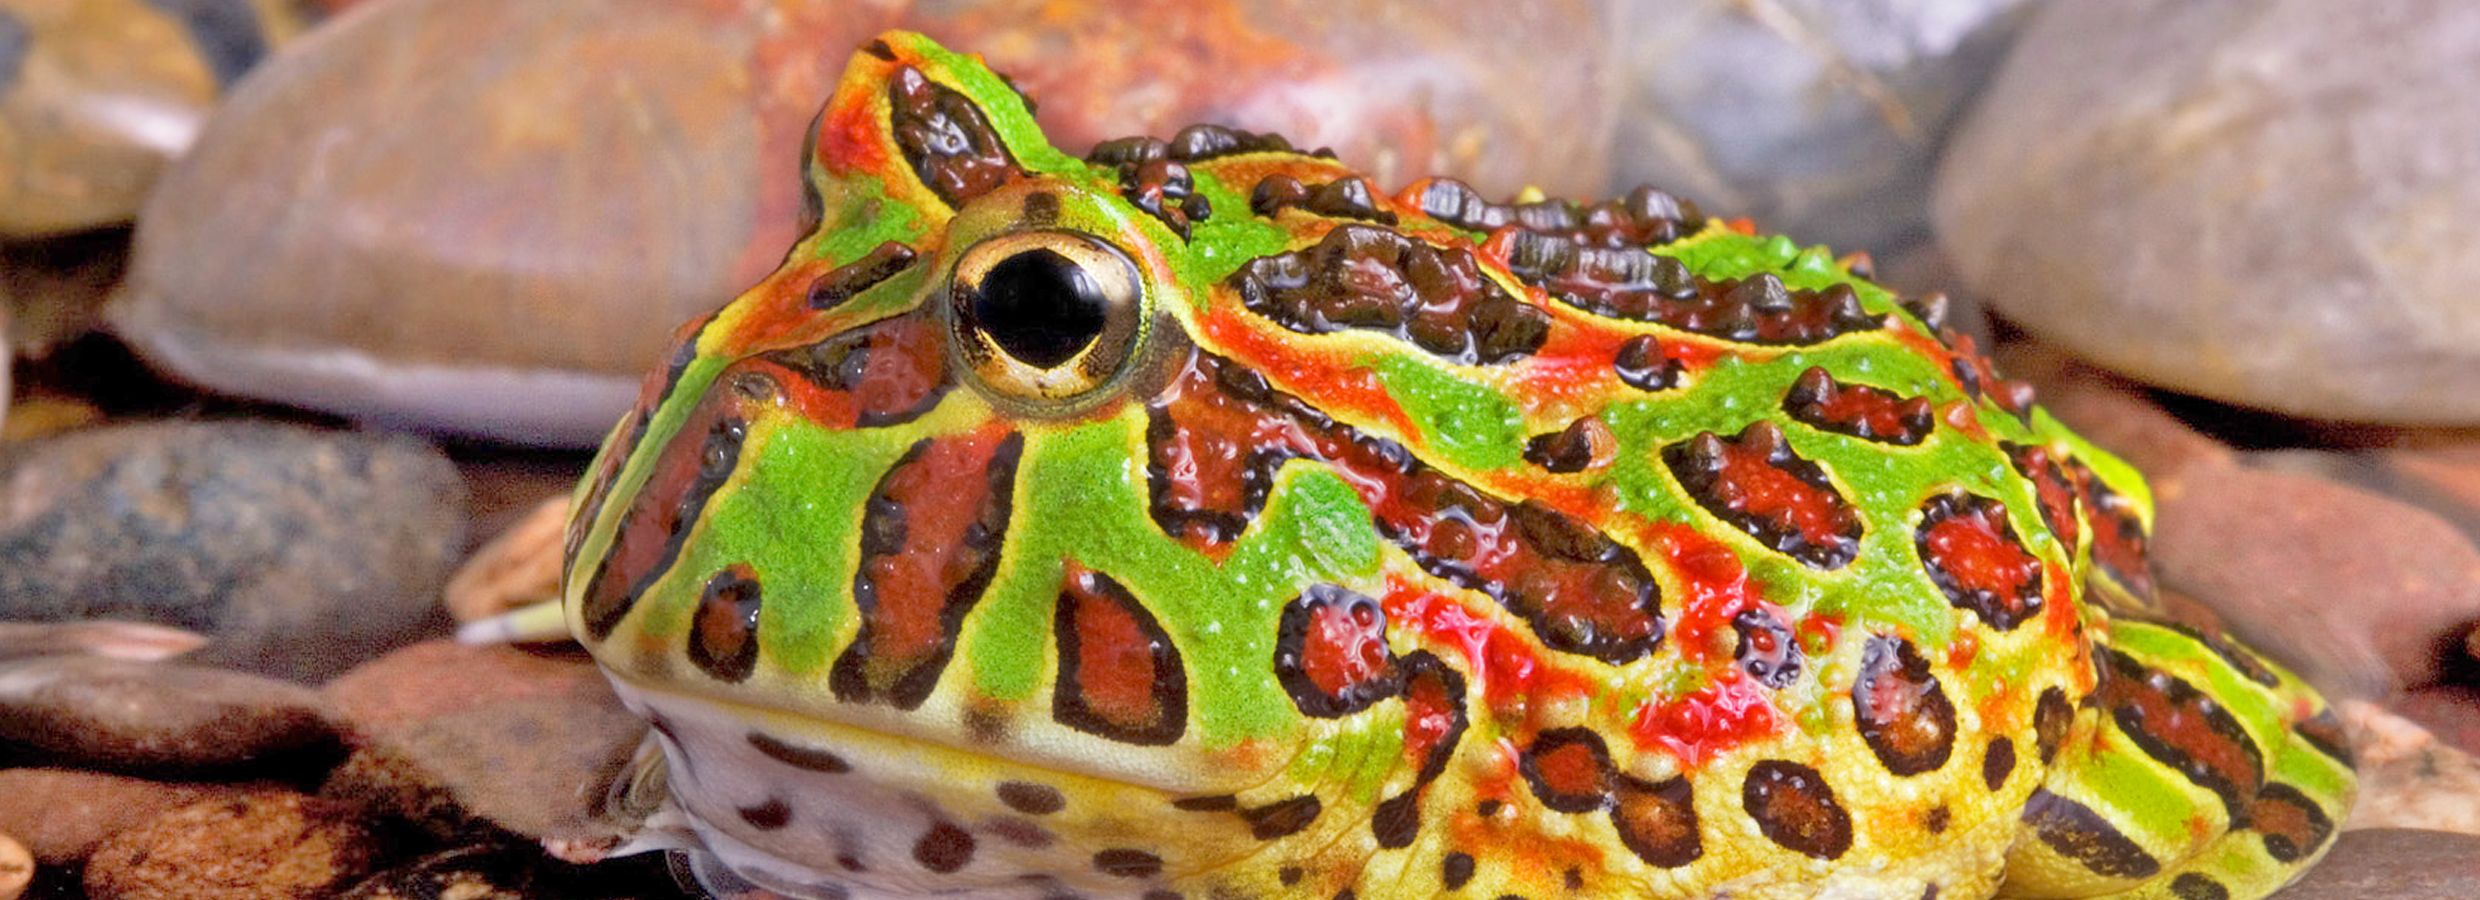 strawberry pineapple pacman frog for sale